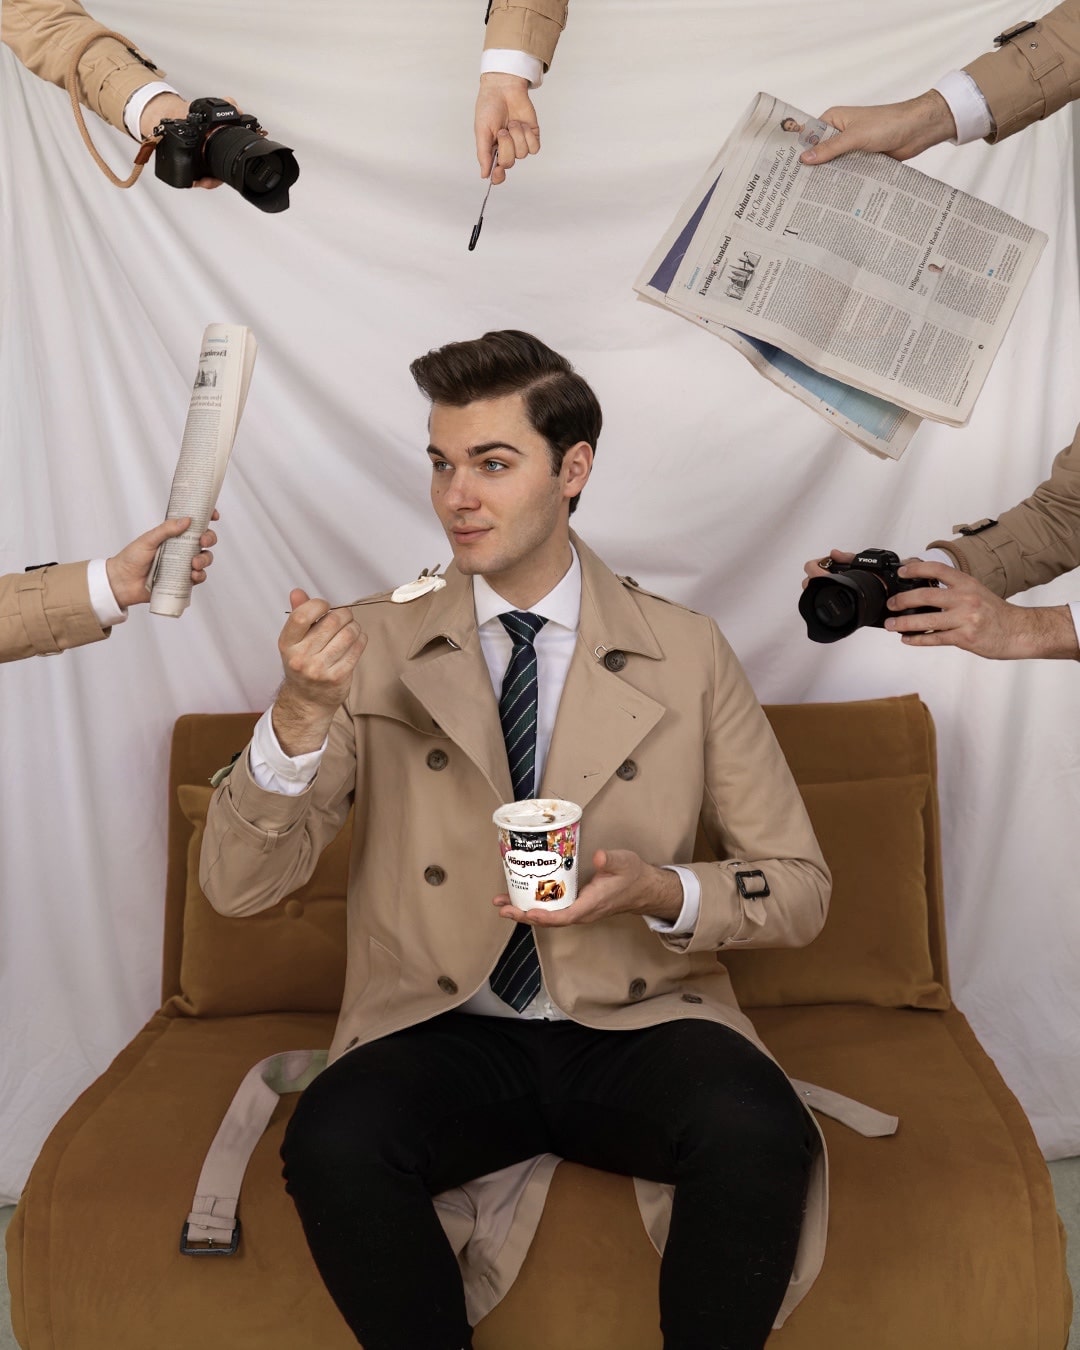 TAKUMI’s influencer campaign for Häagen-Dazs generates sales uplift and rise in brand consideration